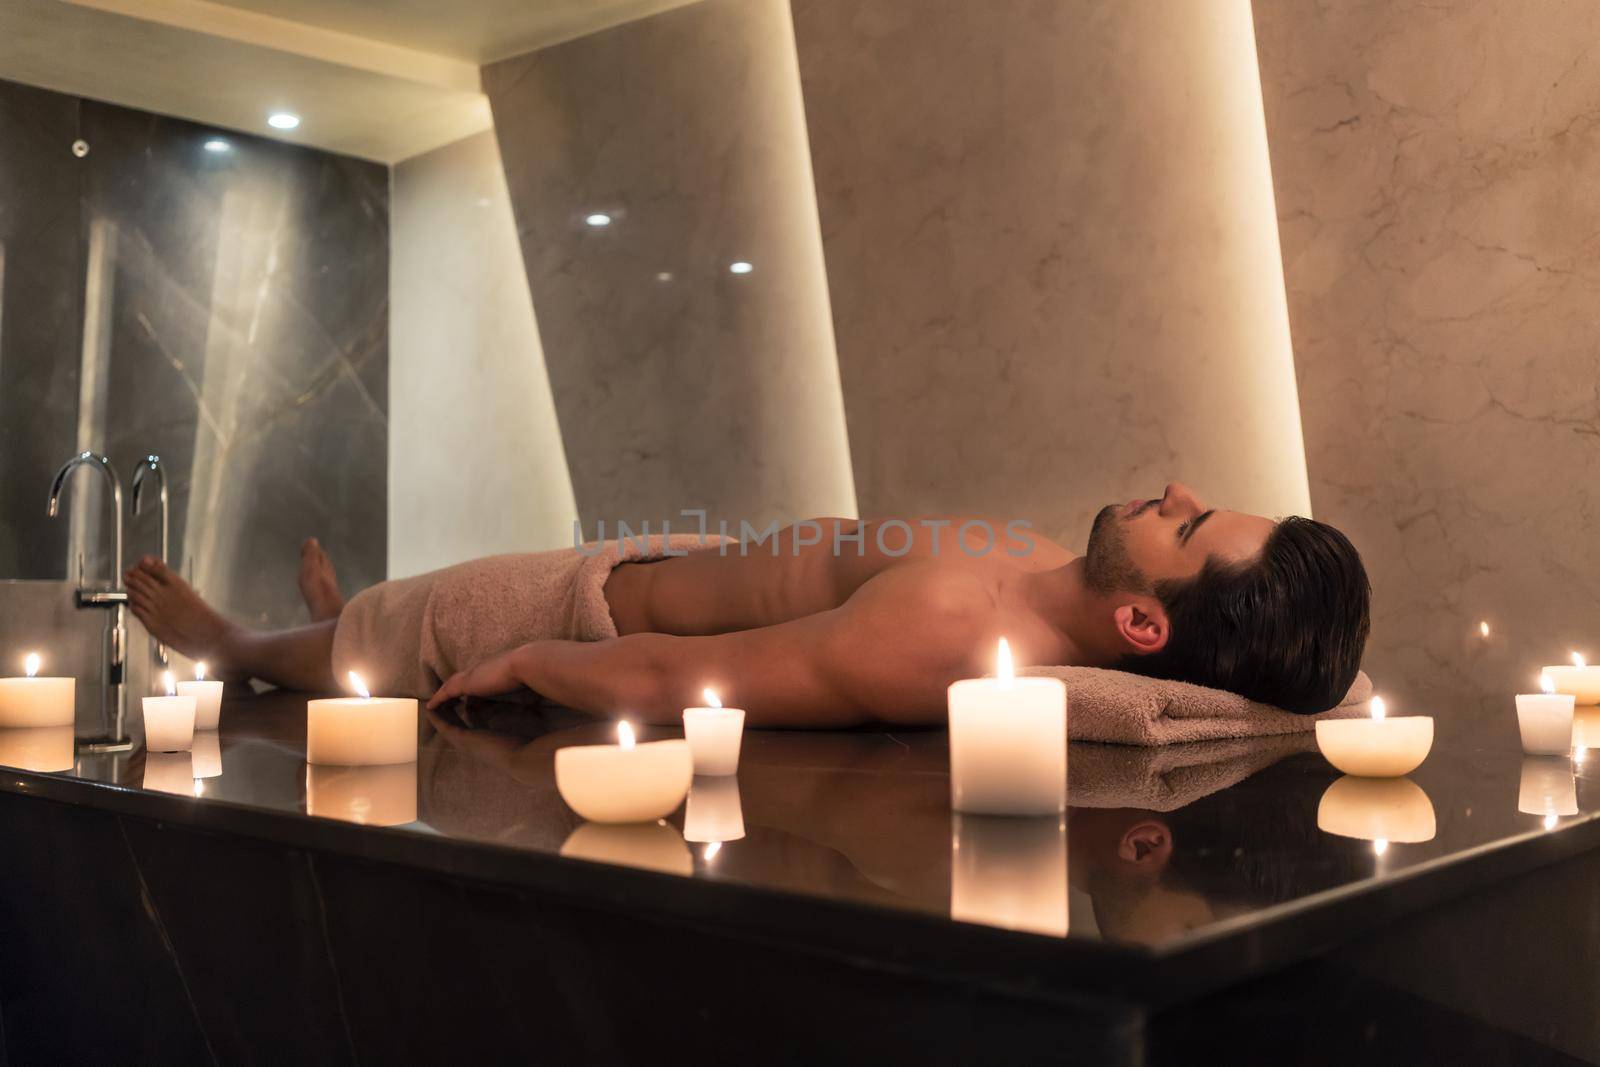 Man relaxing on massage table at Asian spa and wellness center by Kzenon